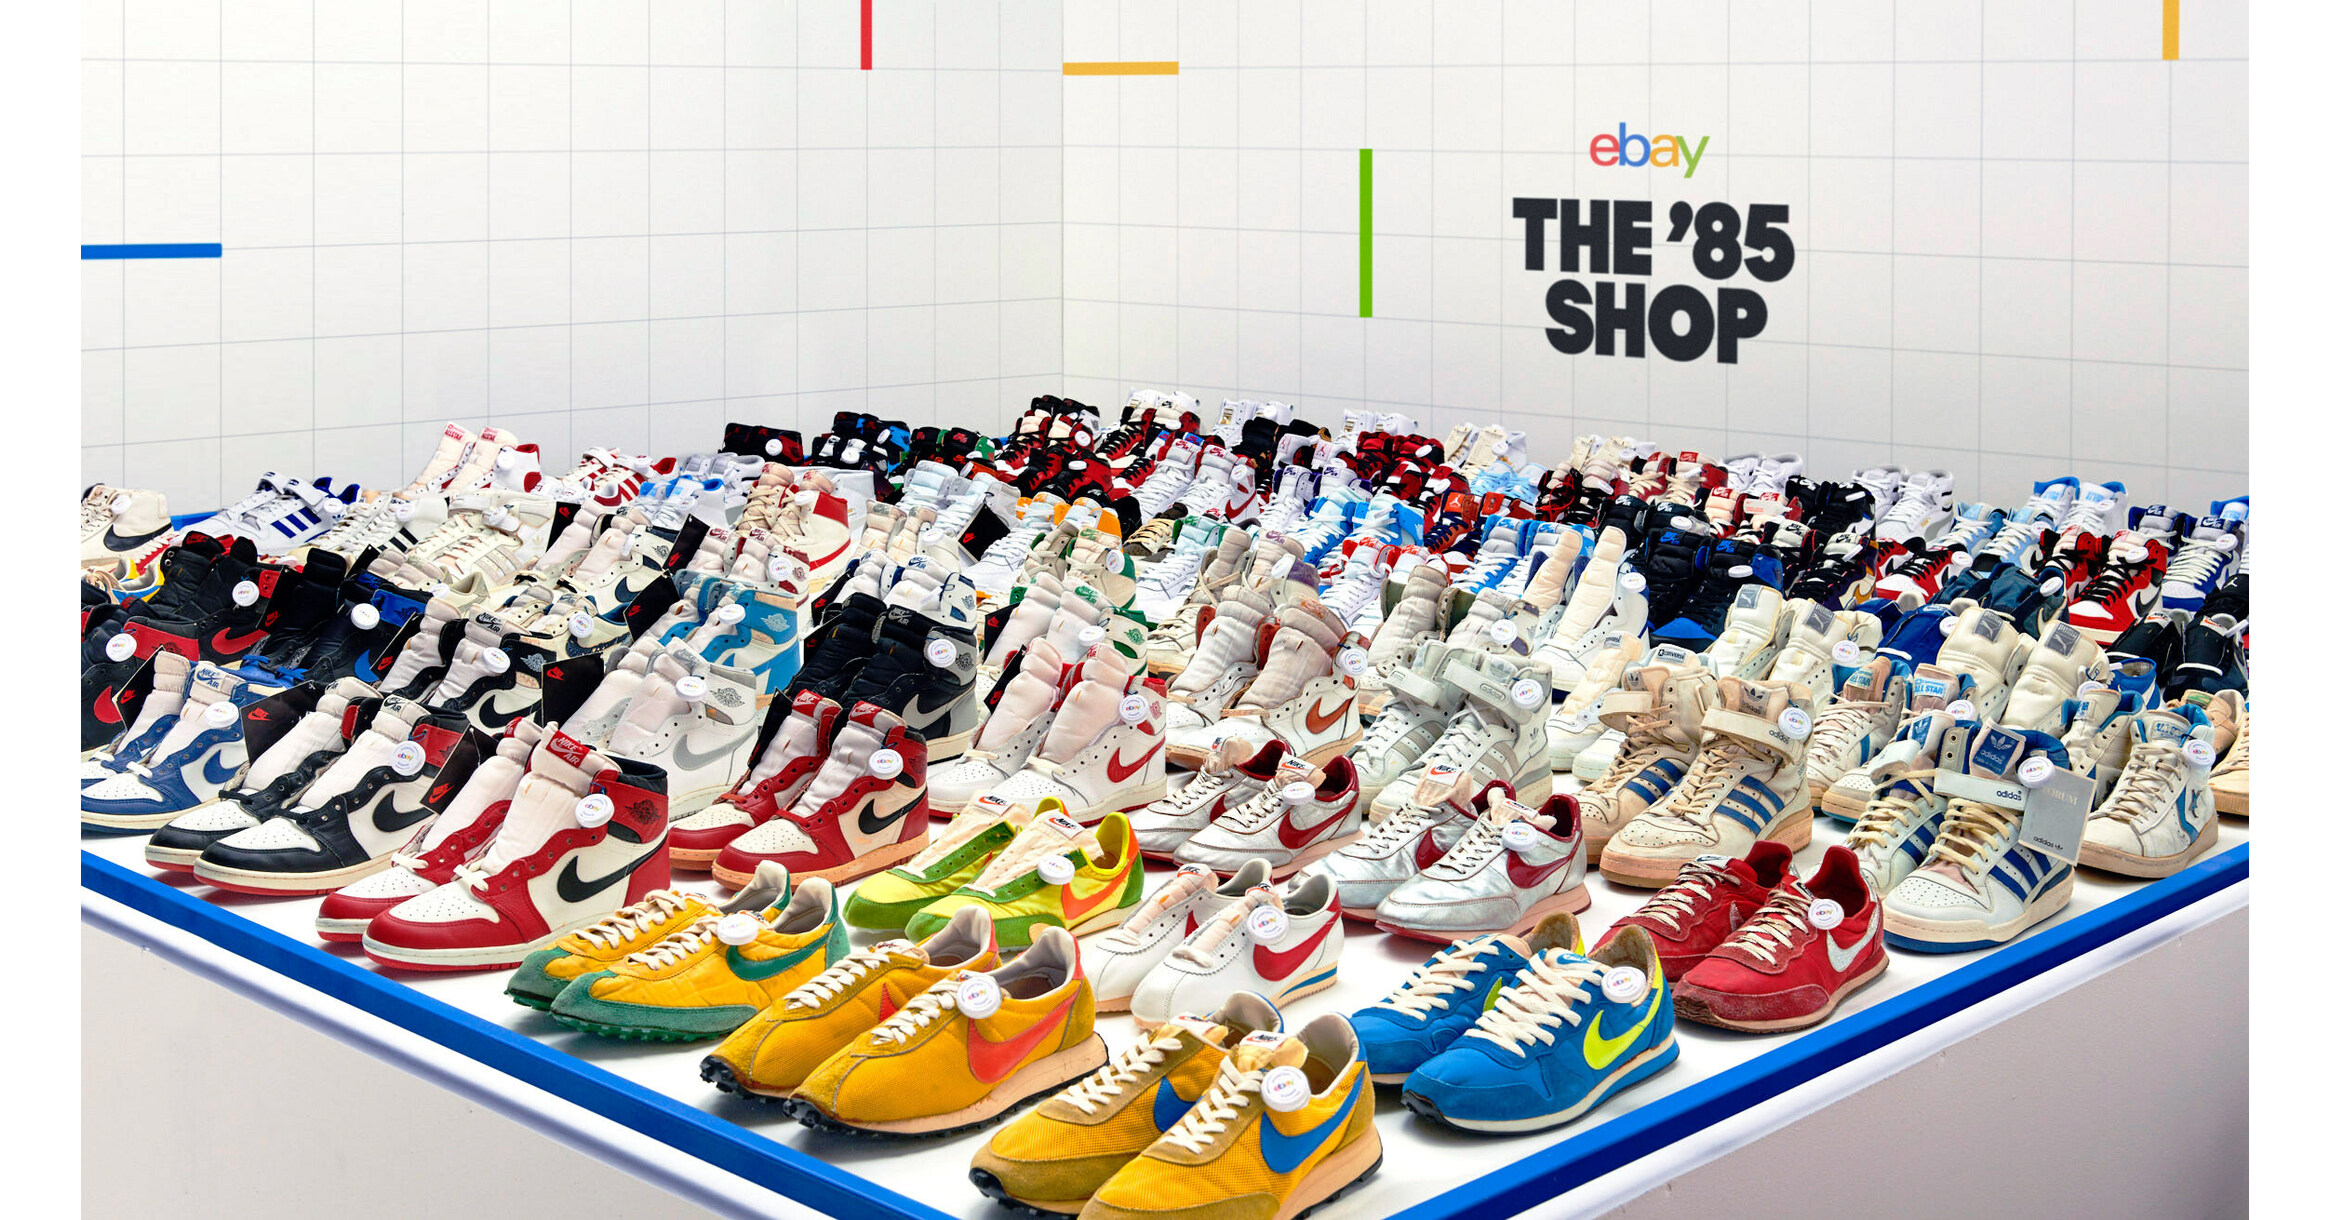 Opens "The '85 Shop" Featuring the Collection Original Jordan 1s Ever Assembled